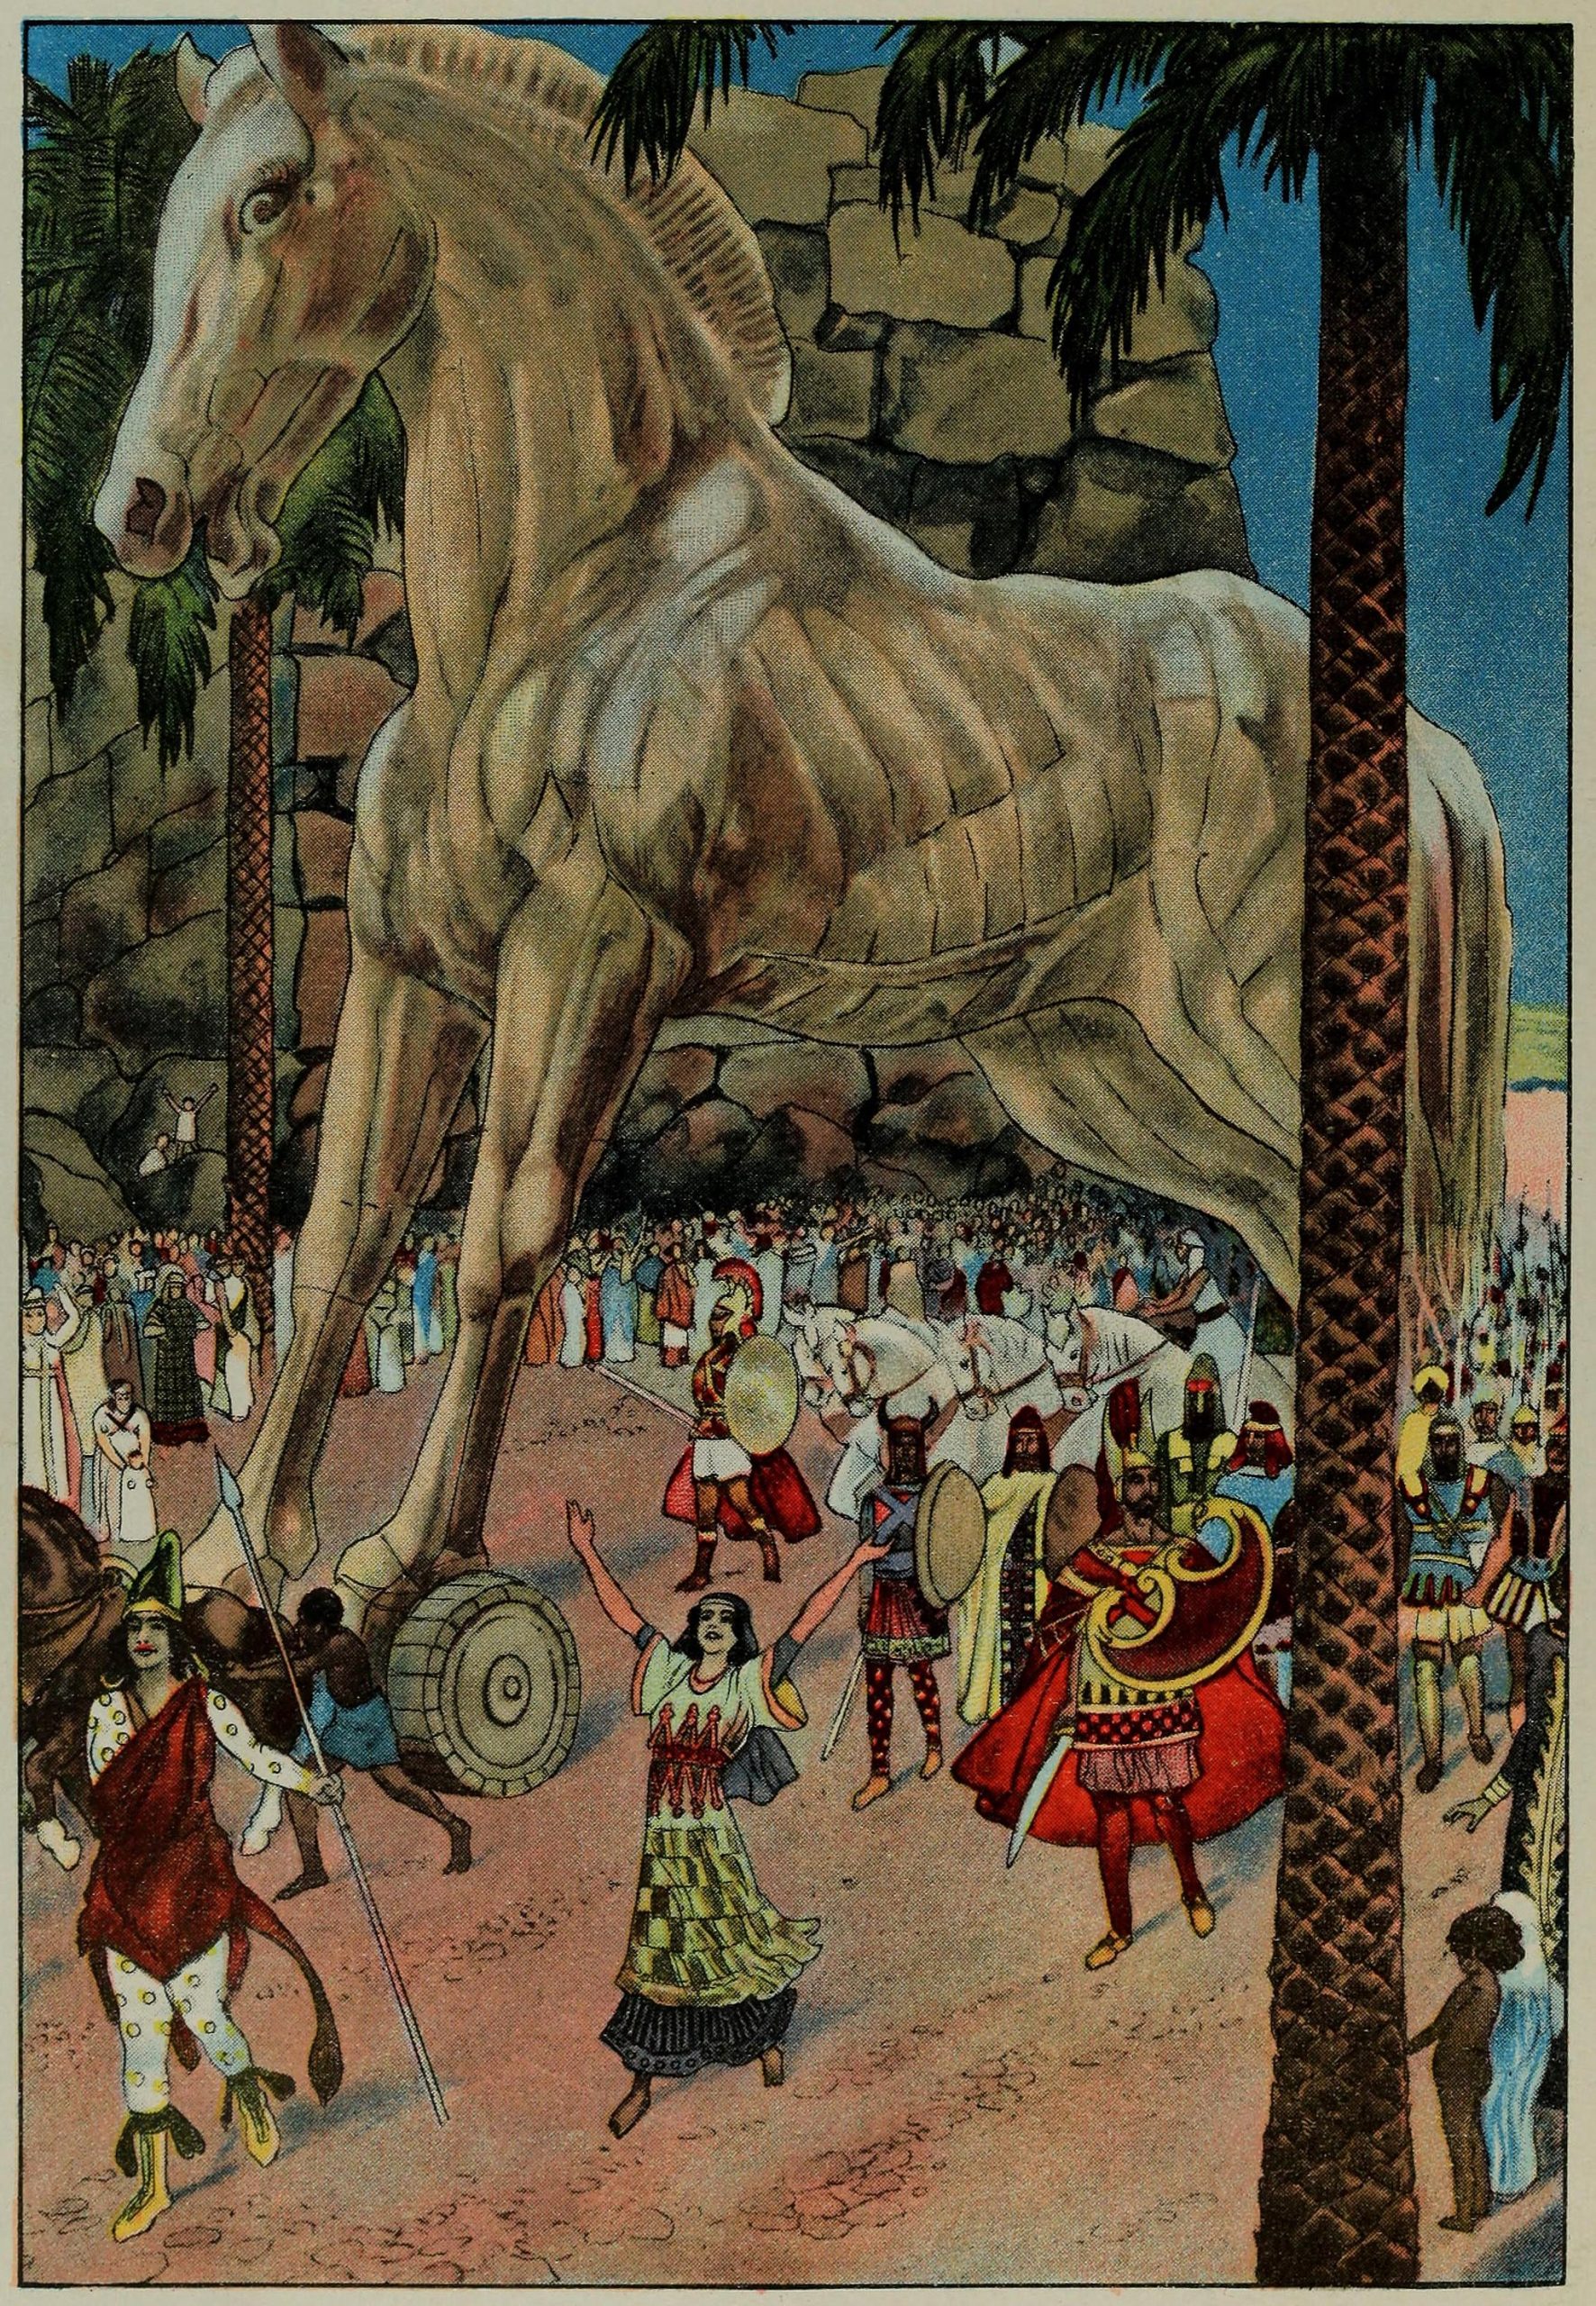 A painting of a large horse towering over a group of civilians.